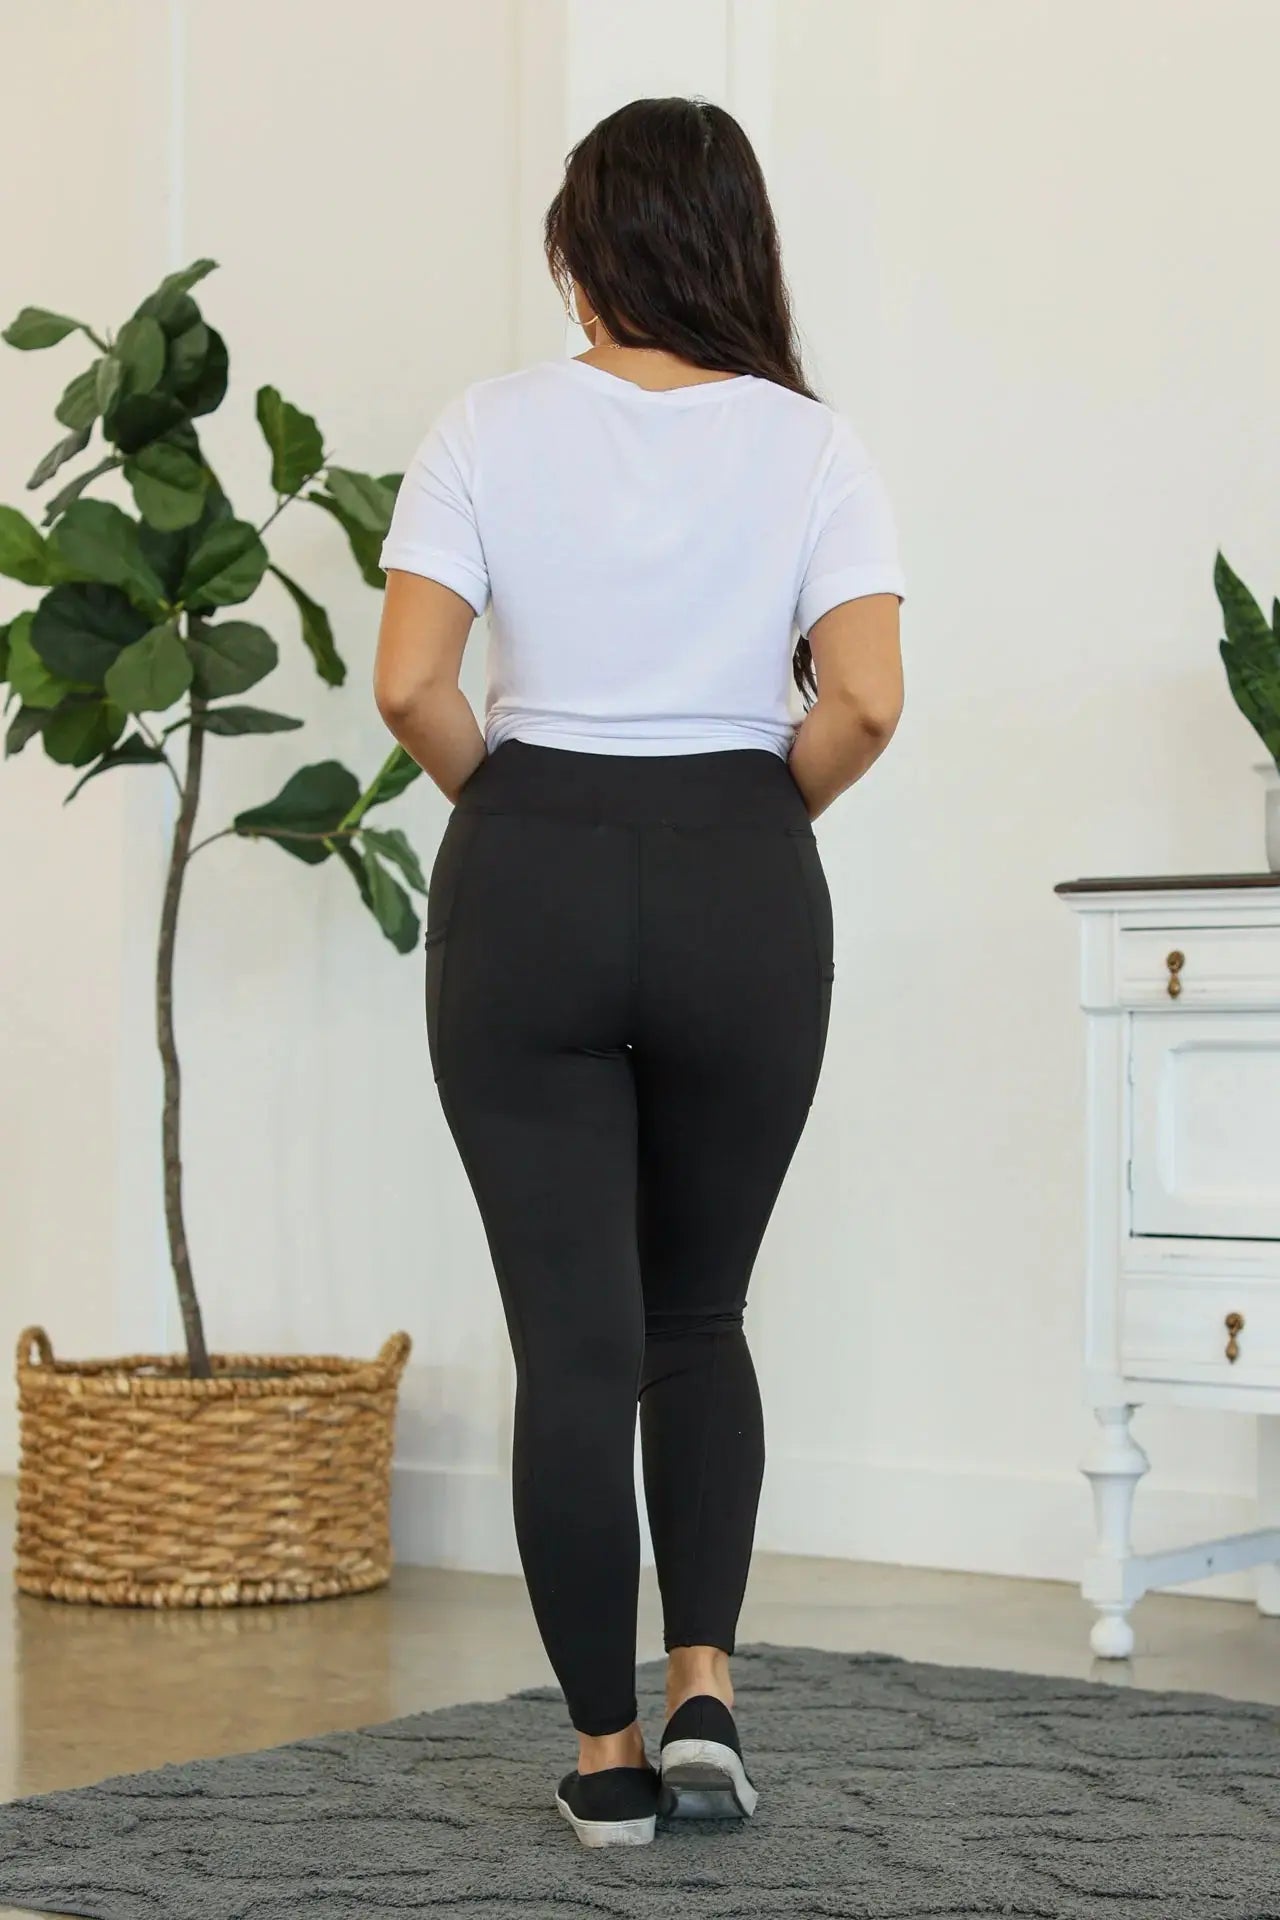 Athleisure Leggings - High-Performance Workout Pants - Stylish Yoga Tights - Flexible Gym Wear - Gift for Fitness Lovers